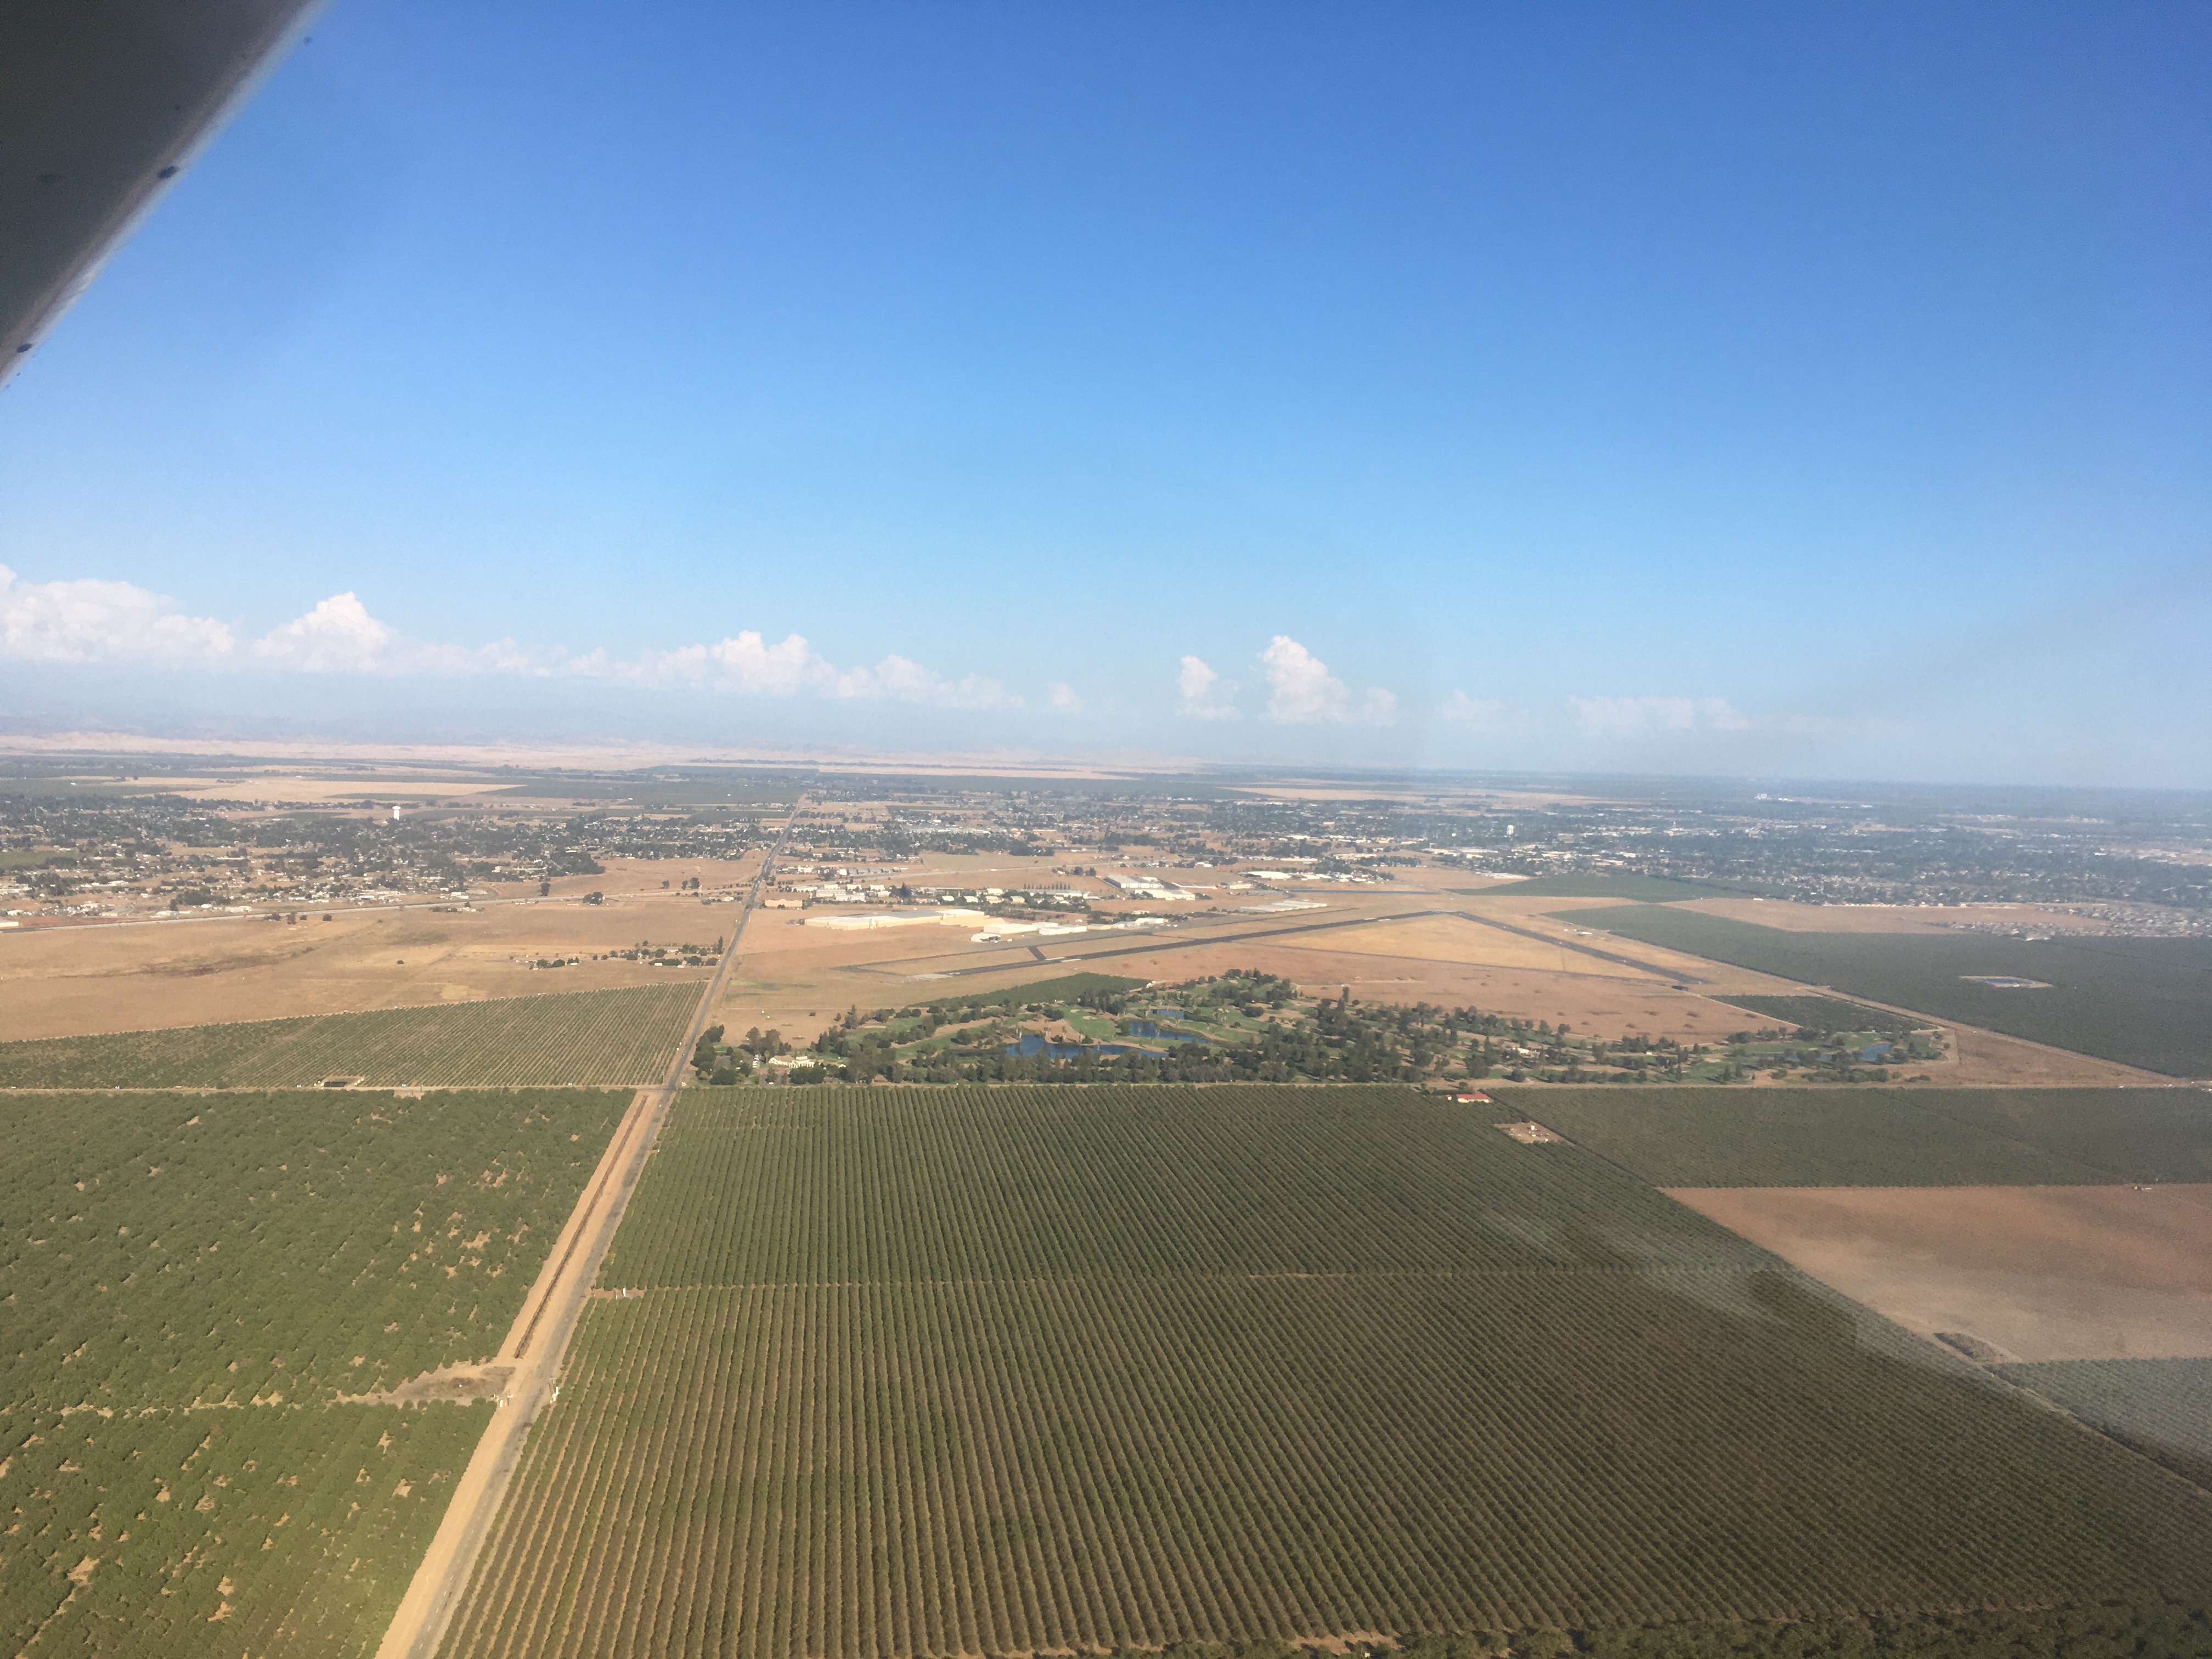 View from the air of wide expans of flat fields, a city with no discernable skyline in the distance, and an airport in the middle ground.  It's Madera, California'